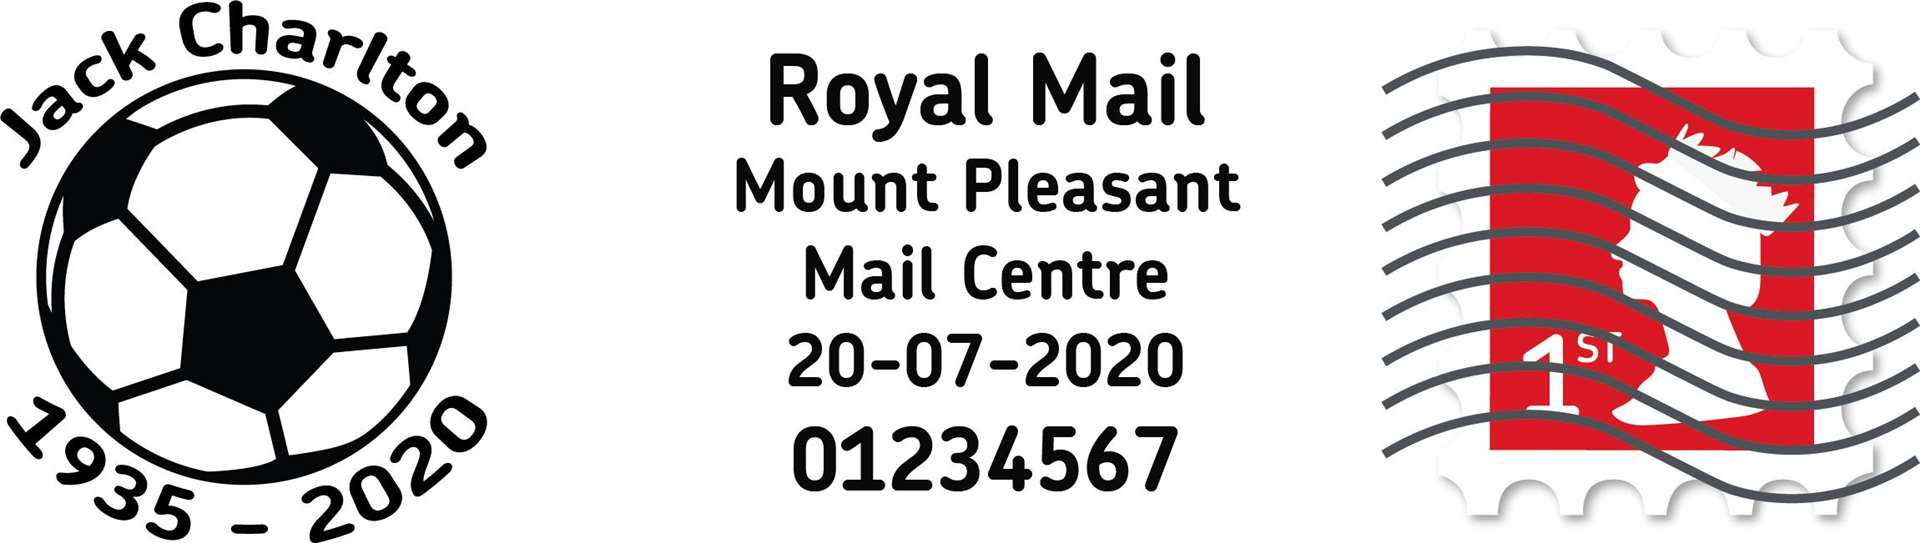 he Royal Mail and the Irish postal service An Post have collaborated for the first time to create the postmark (PA Media/PA)